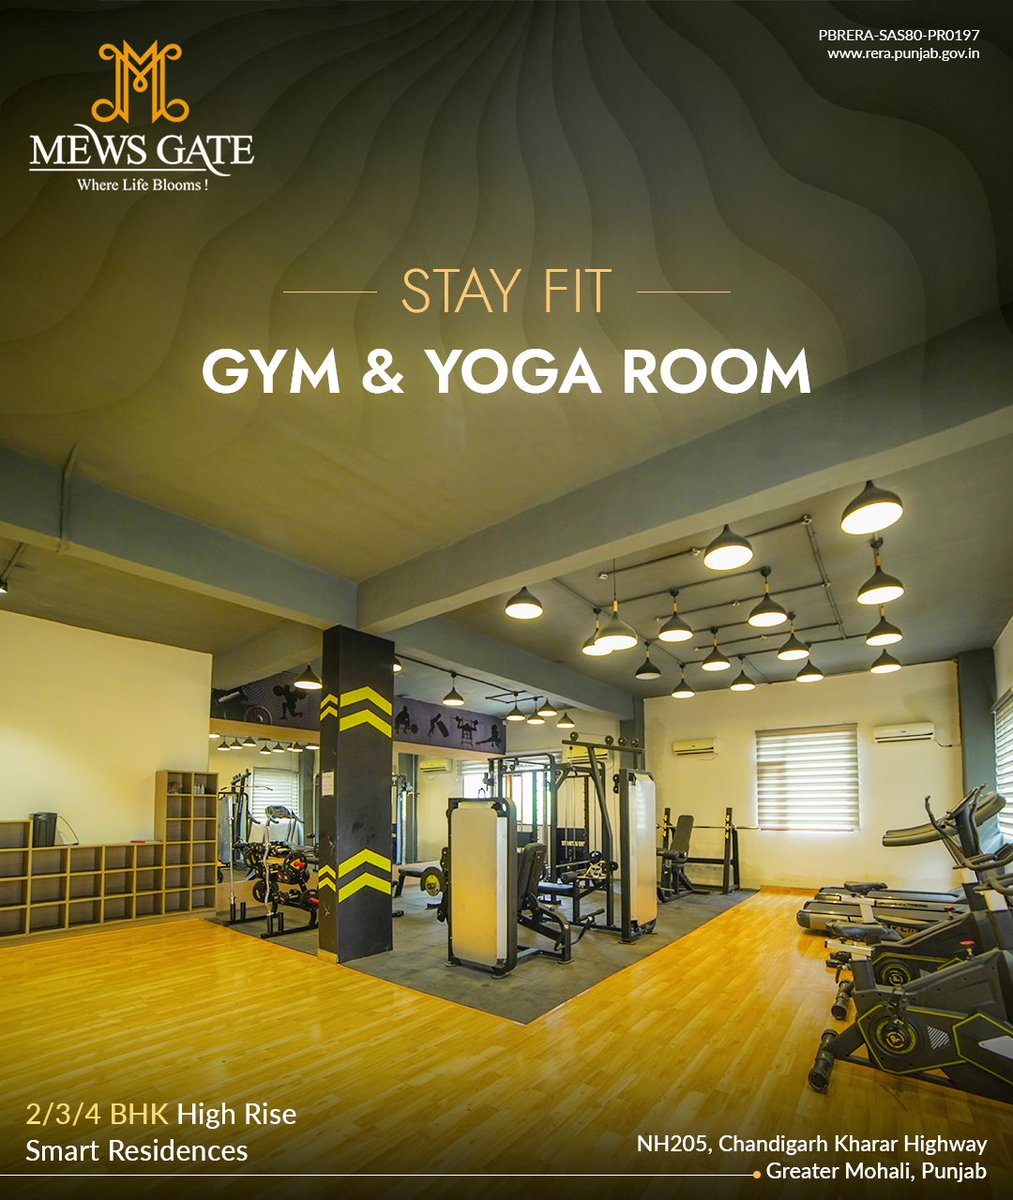 Experience the perfect blend of fitness and relaxation. 

-GYM & YOGA Room 

🏠2/3/4 BHK High-Rise Smart Residences 
📍NH 205, Chandigarh Kharar Highway Greater Mohali, Punjab 

↘️Call us at 90695-90695 

#MewsGate #Fitness #Gyma #Health #YogaRoom #SmartResidences #Kharar #Mohali